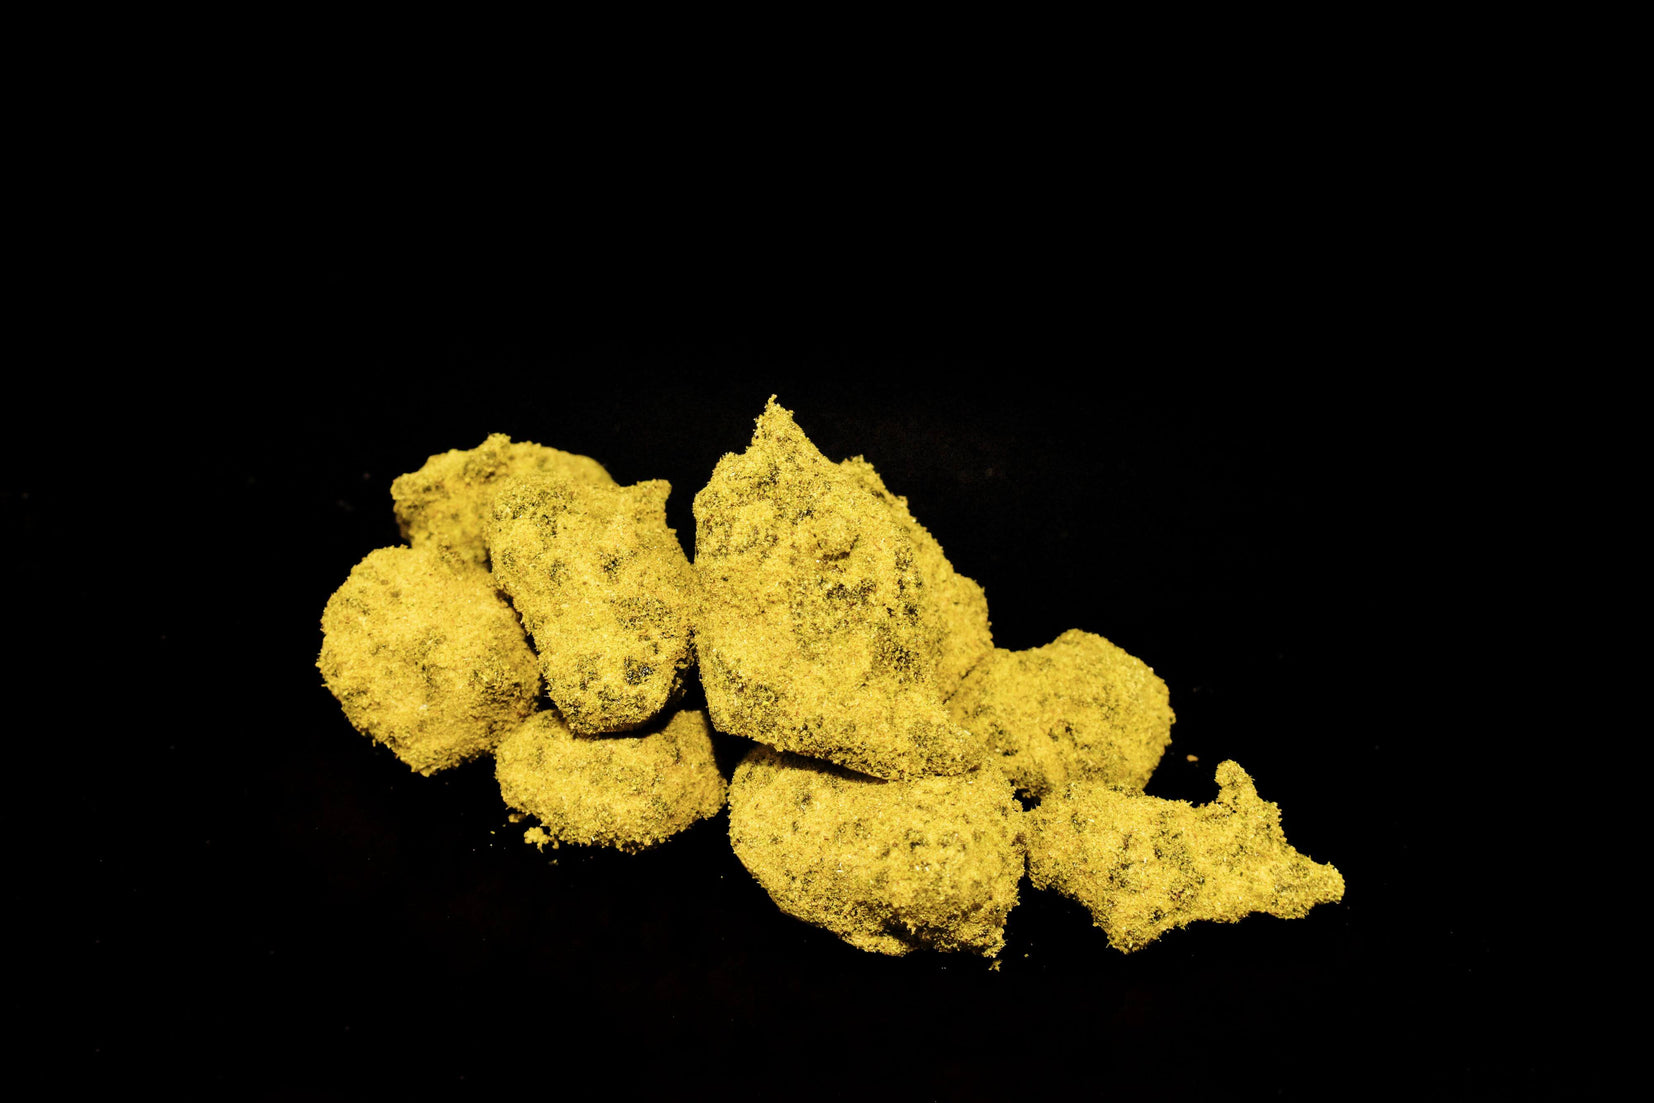 A Beginner's Guide To Moon Rocks